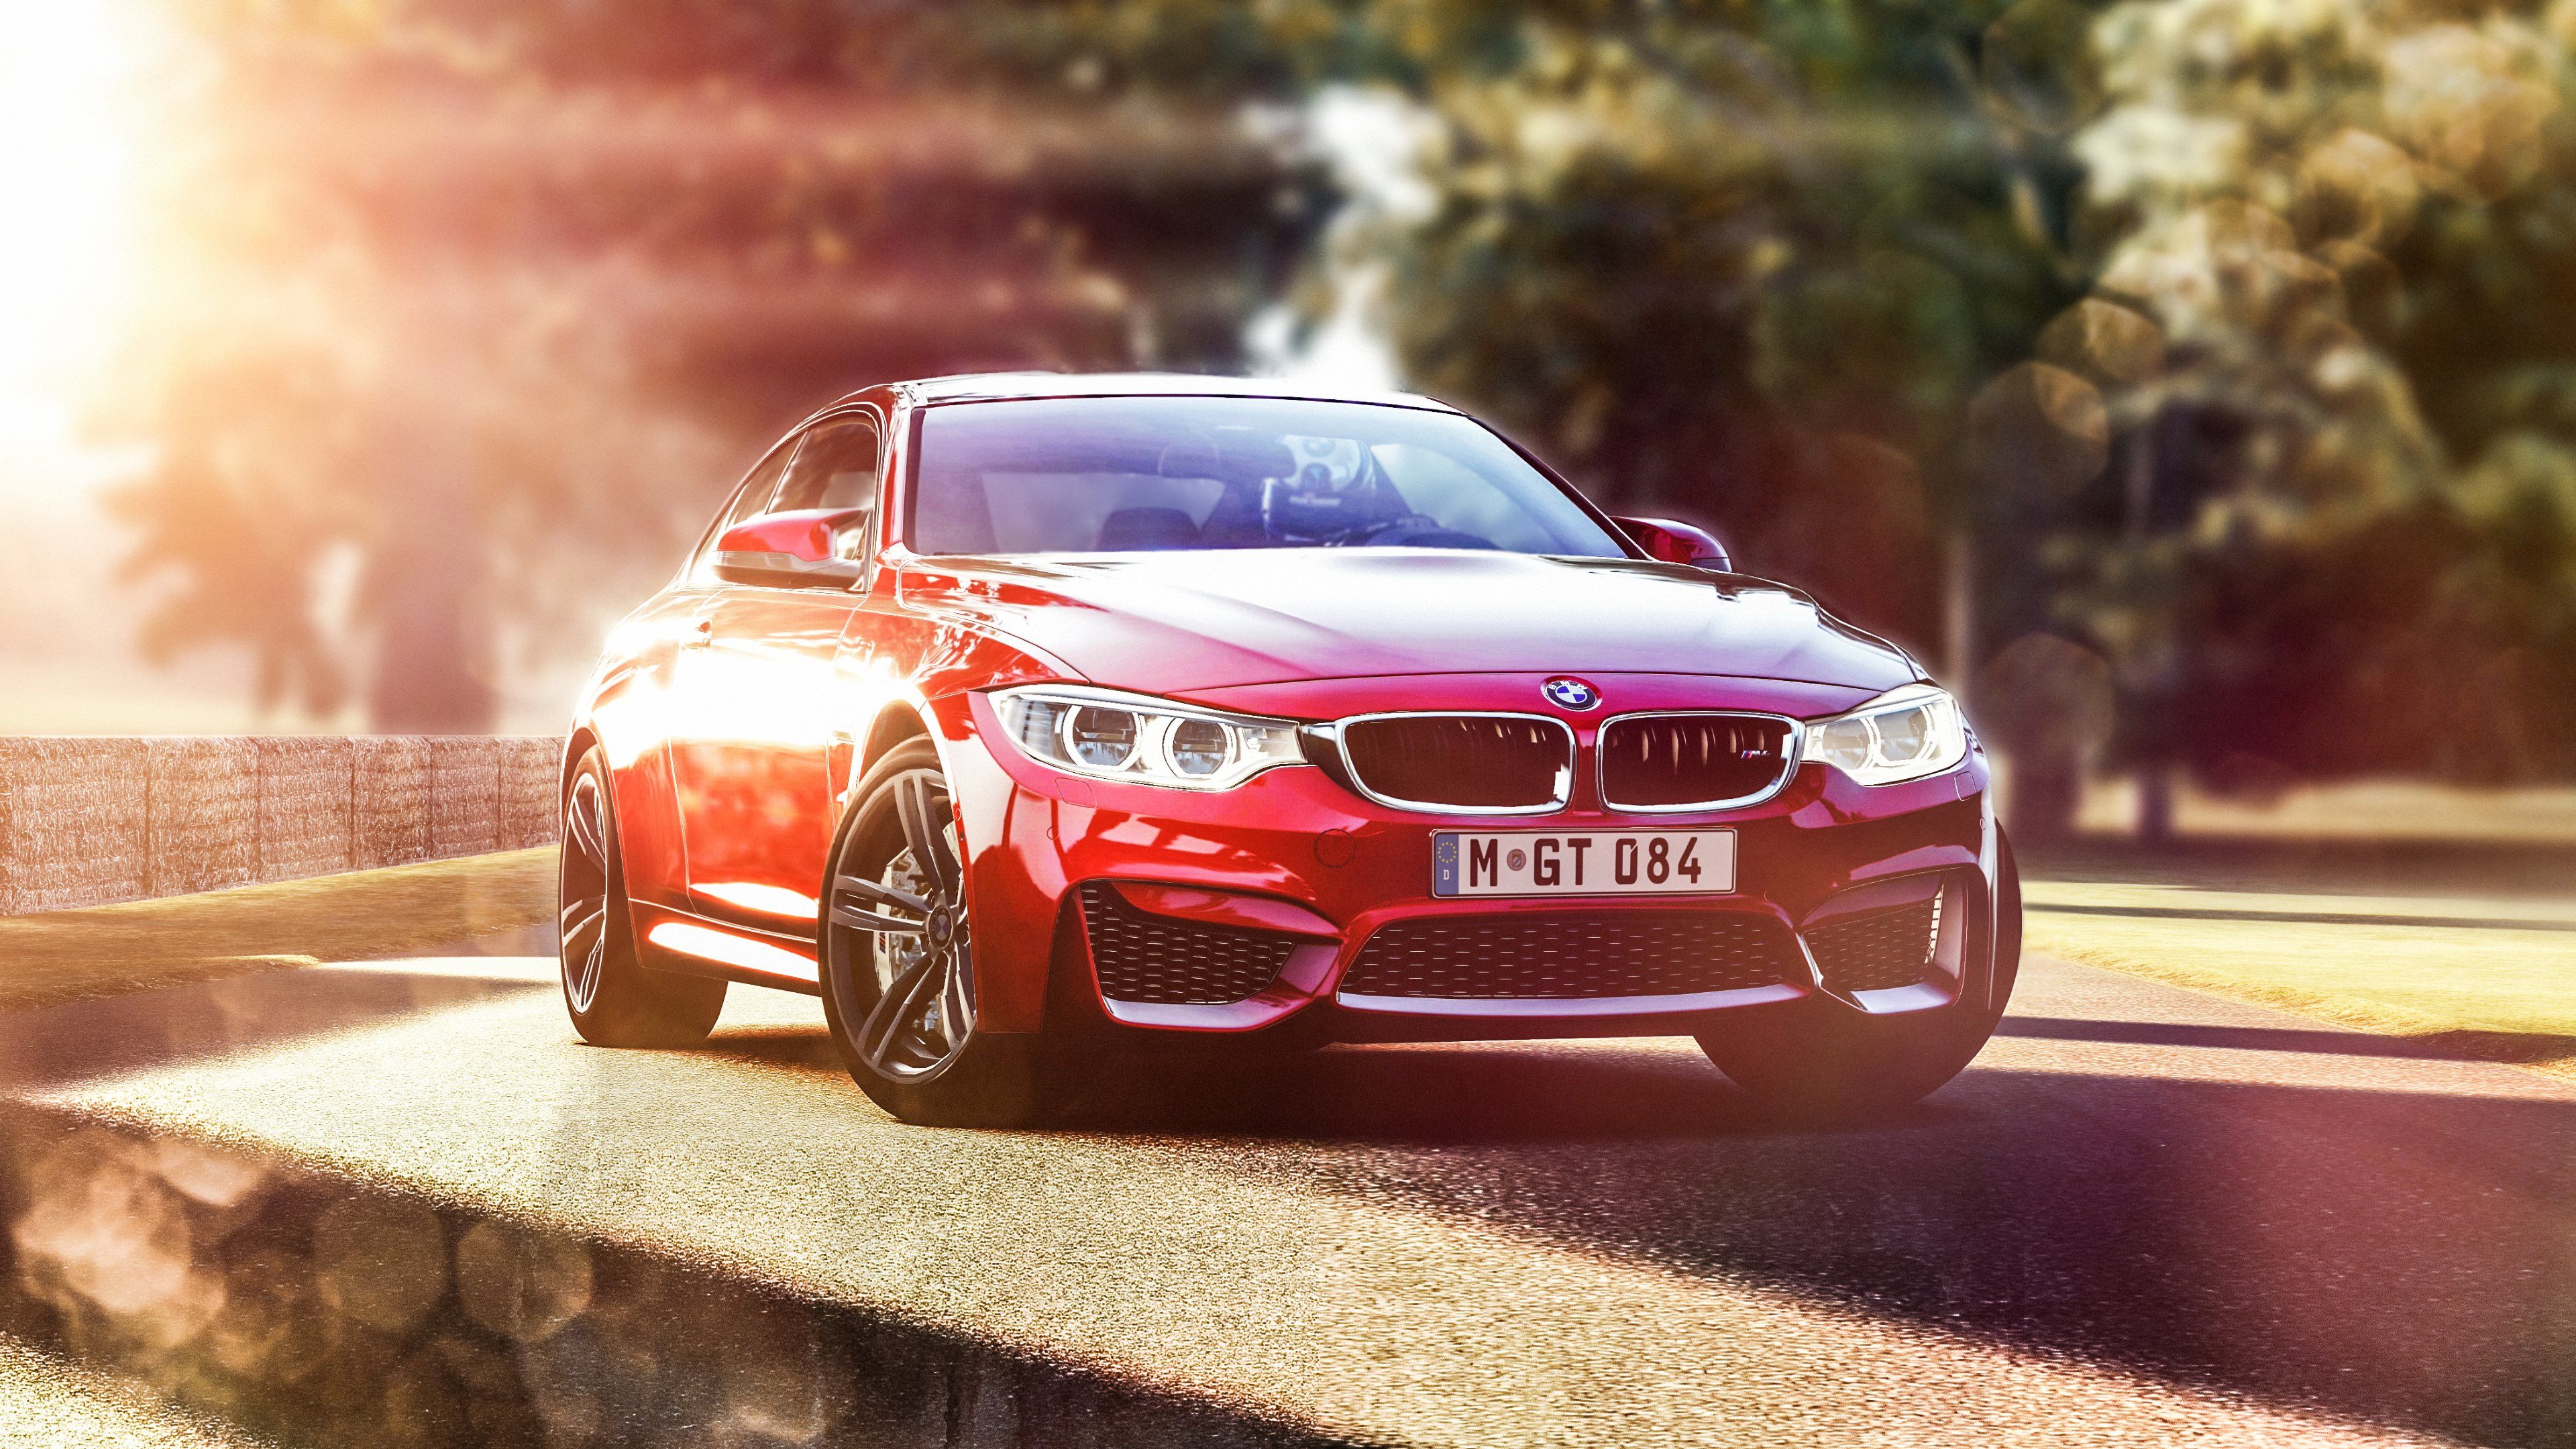 Red BMW M4 on the road - BMW